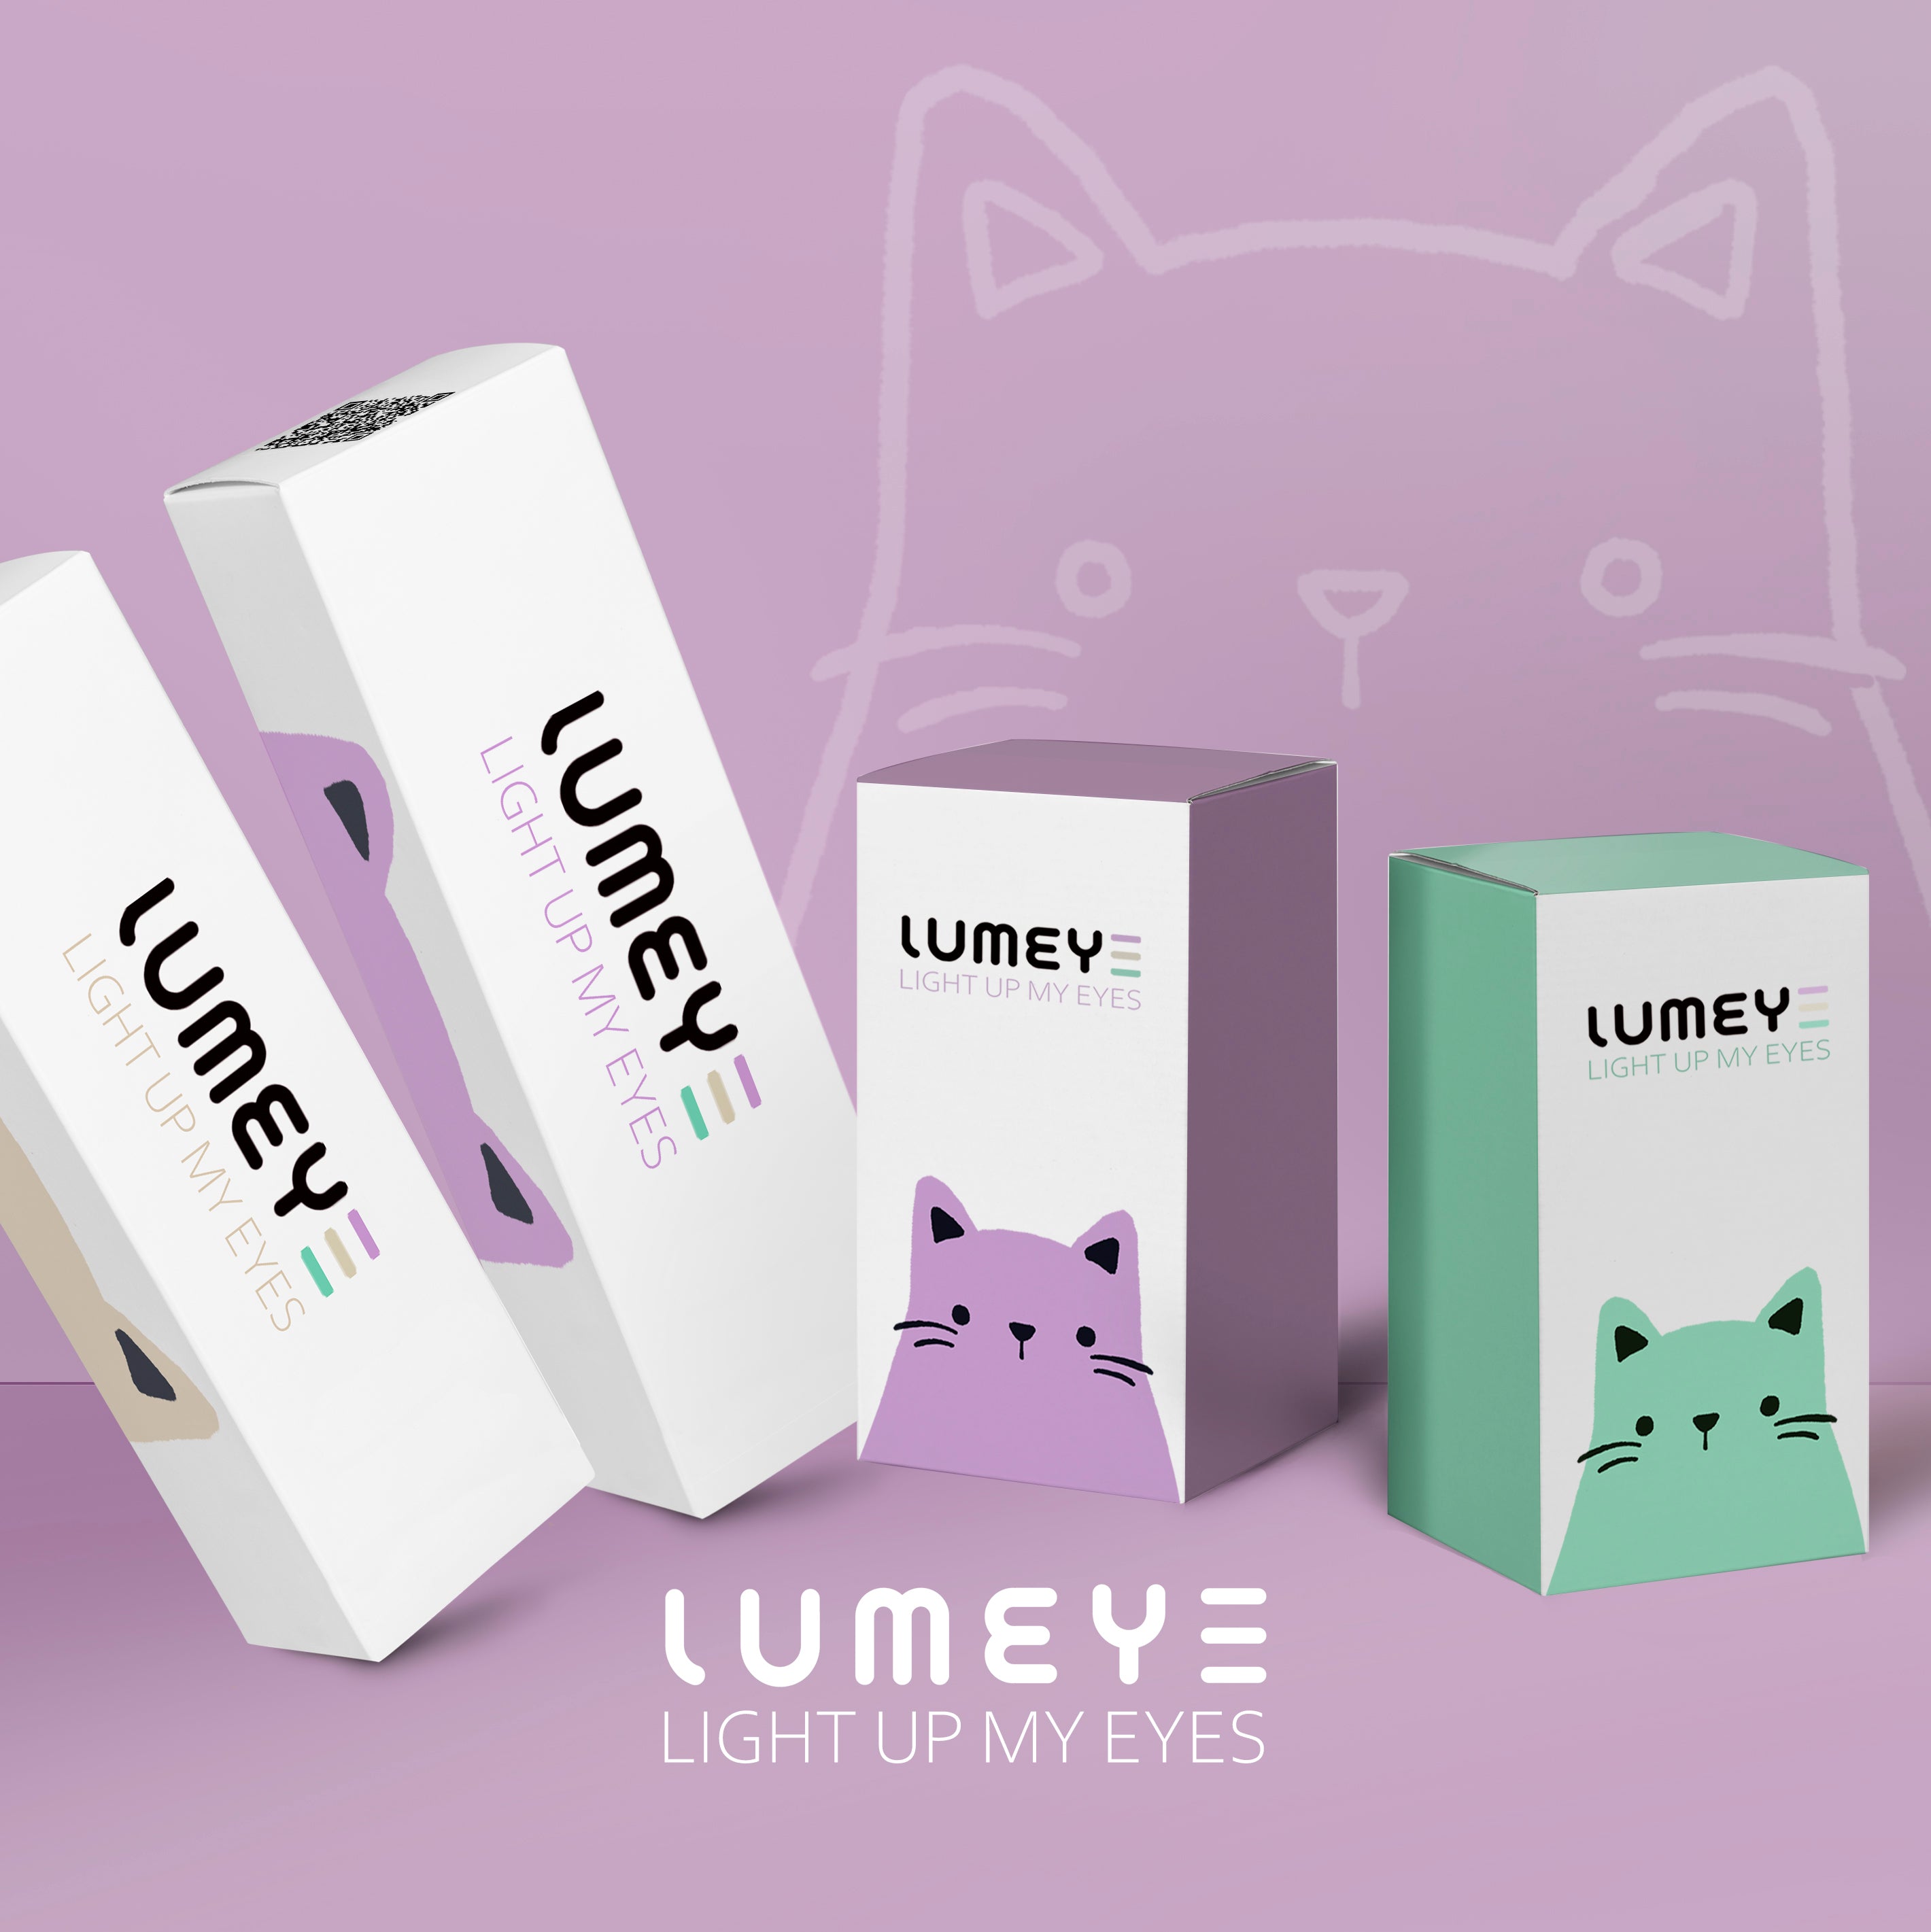 Best COLORED CONTACTS - LUMEYE Juicy Peachy Pink Colored Contact Lenses - LUMEYE